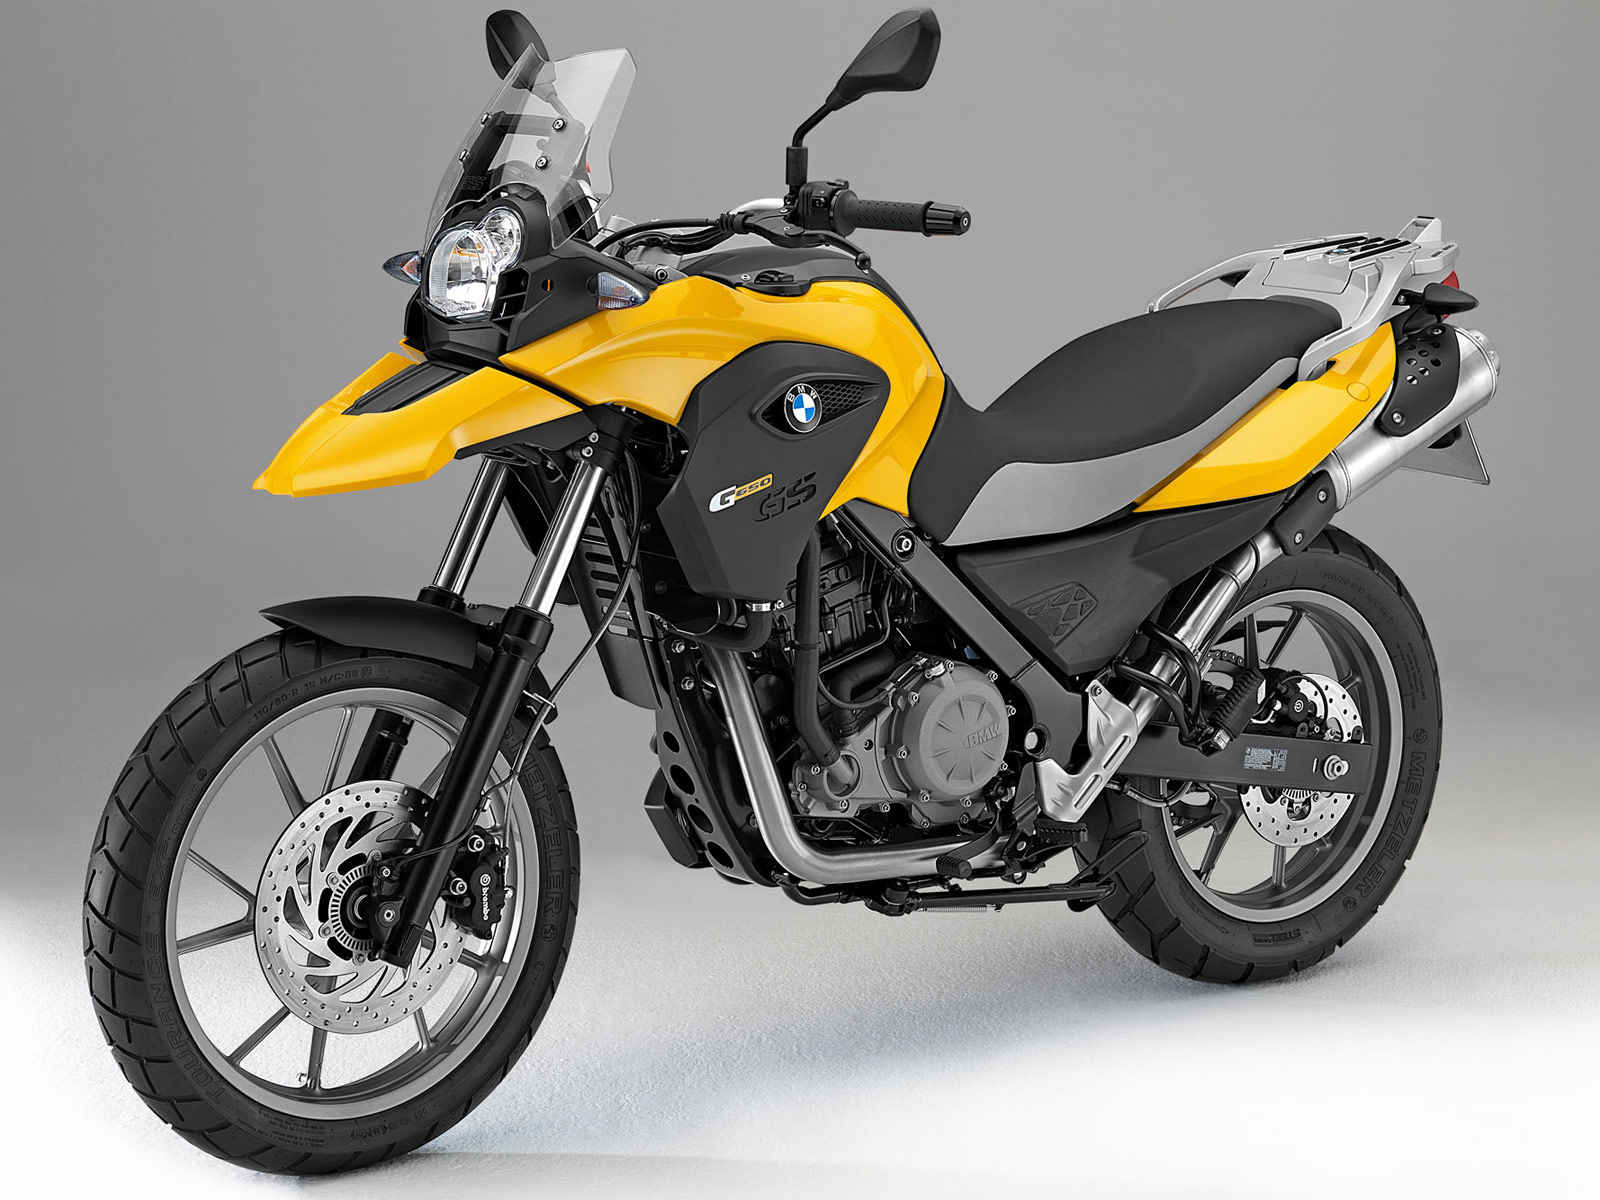 bmw motorcycles 2013 models 2013 bmw g650gs from model year 2013 the bmw g 650 gs is available in 